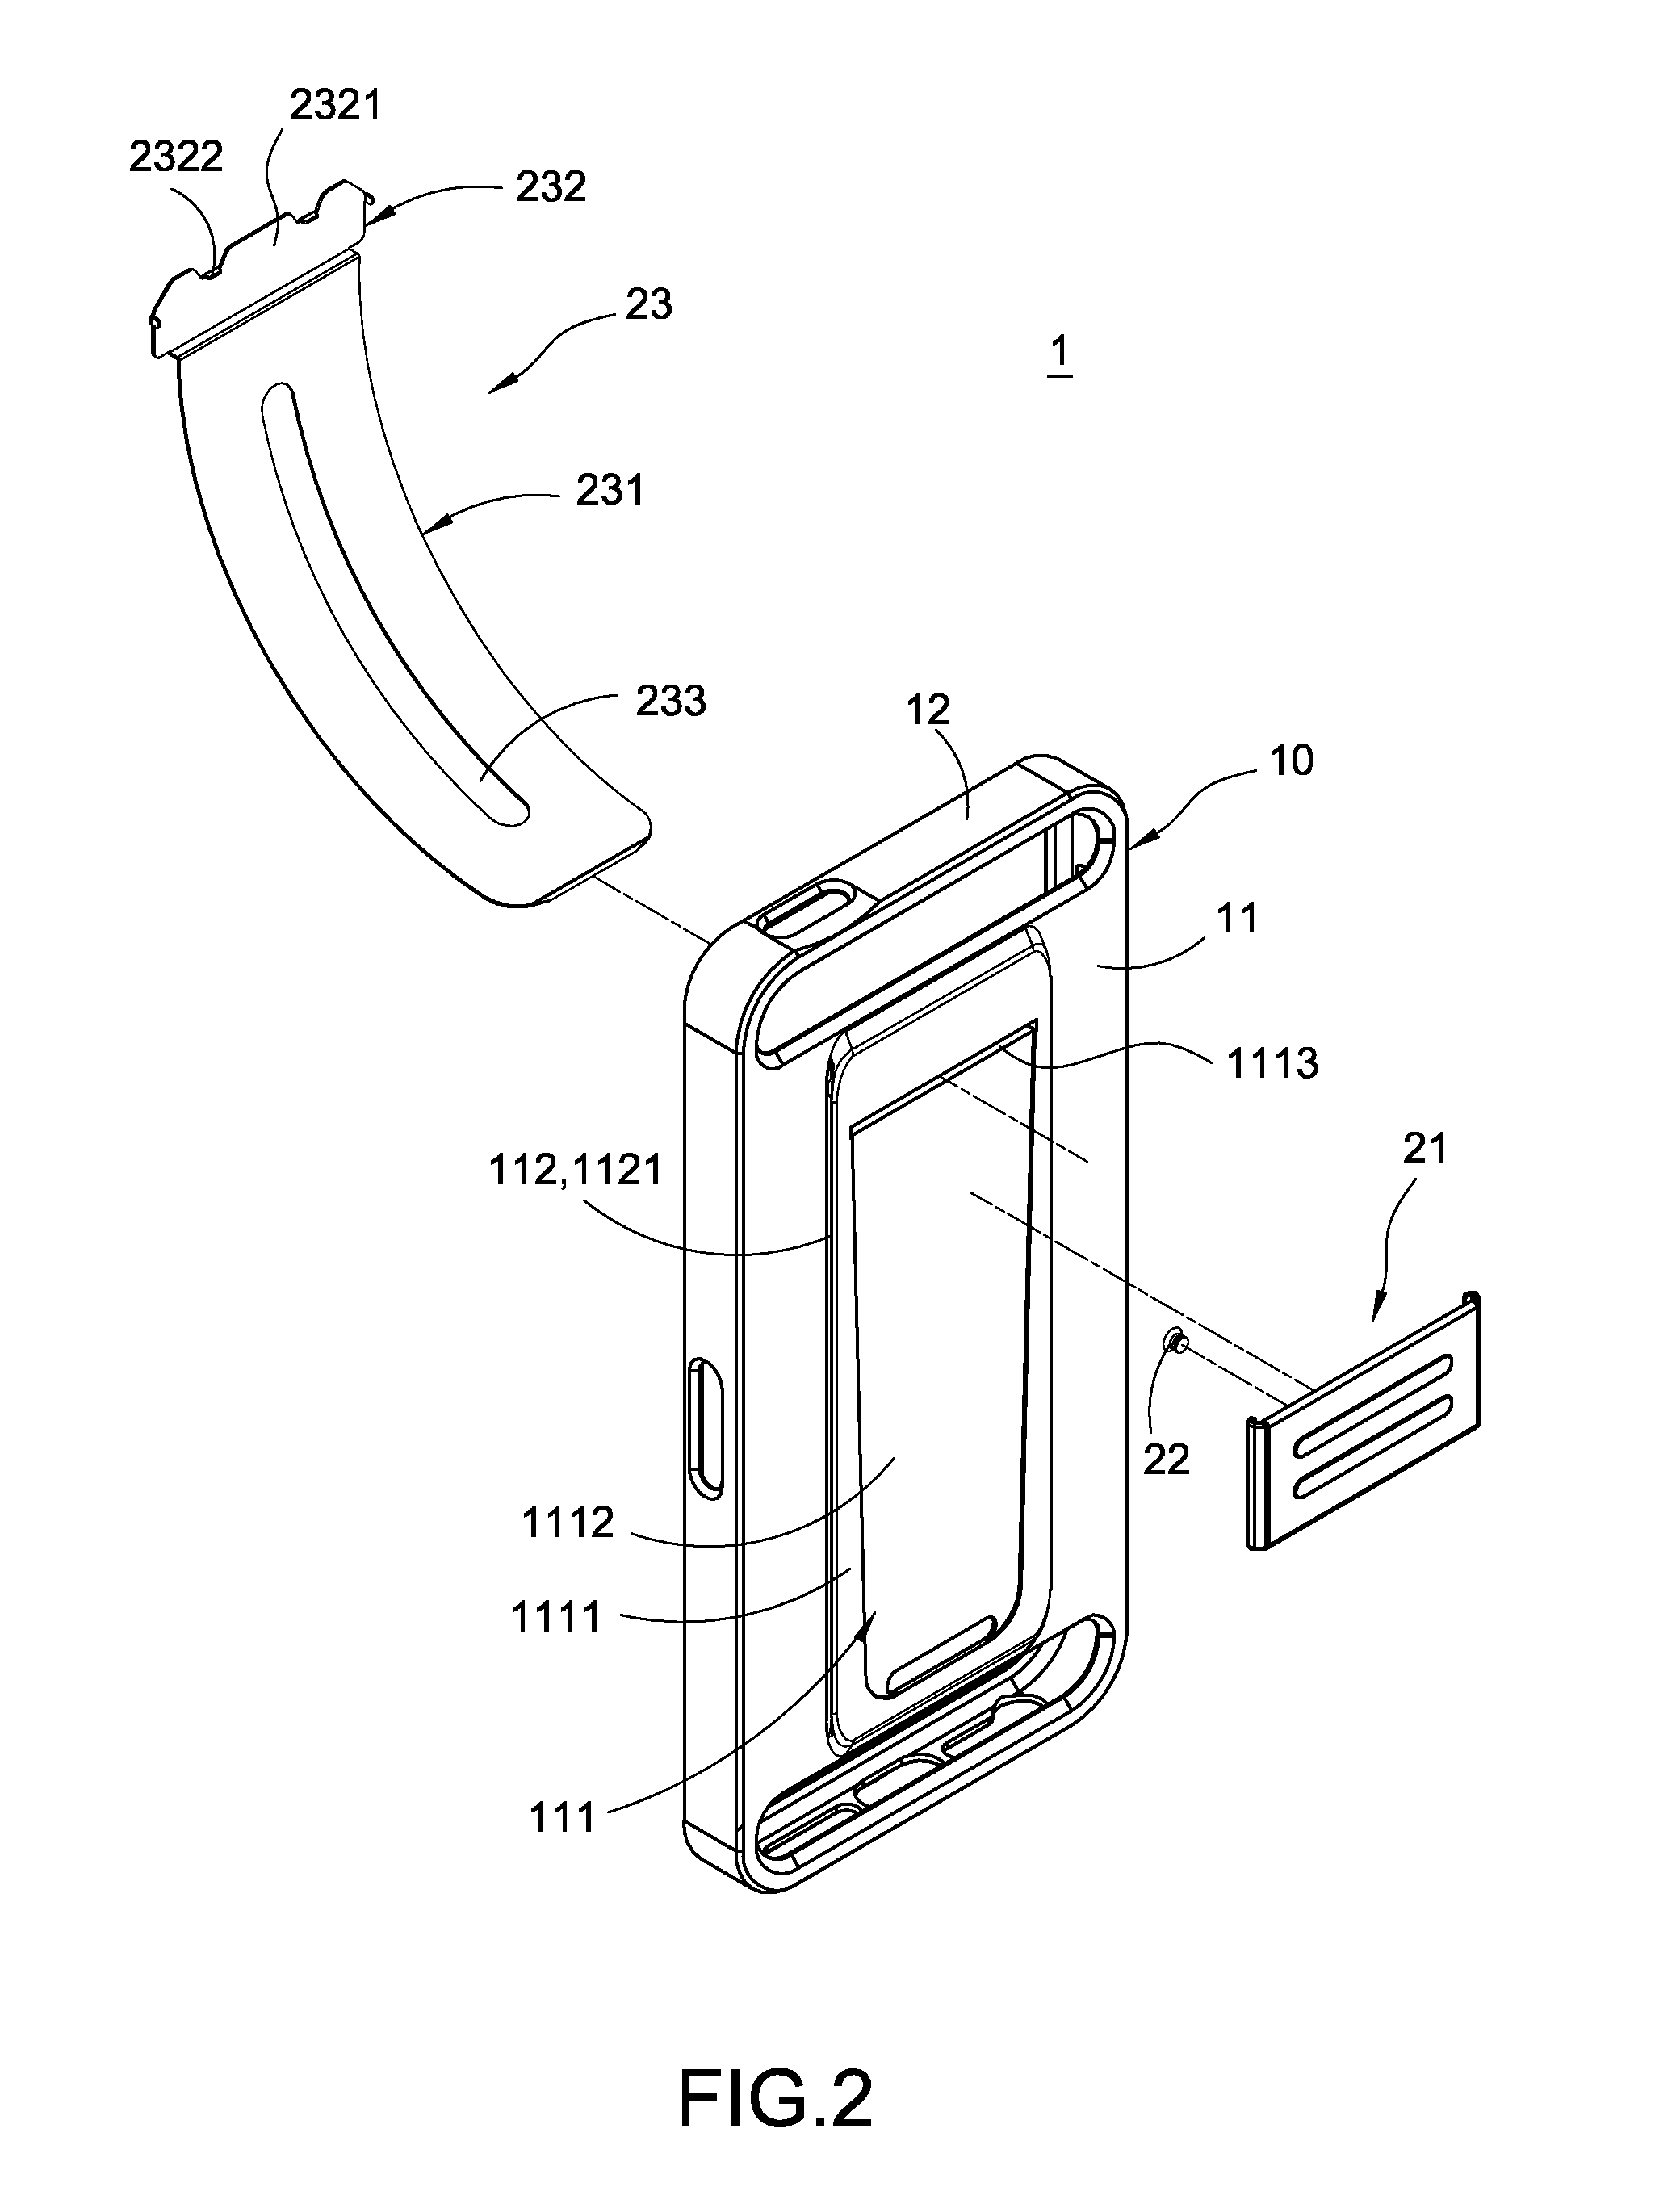 Supportive protective cover for a handheld device